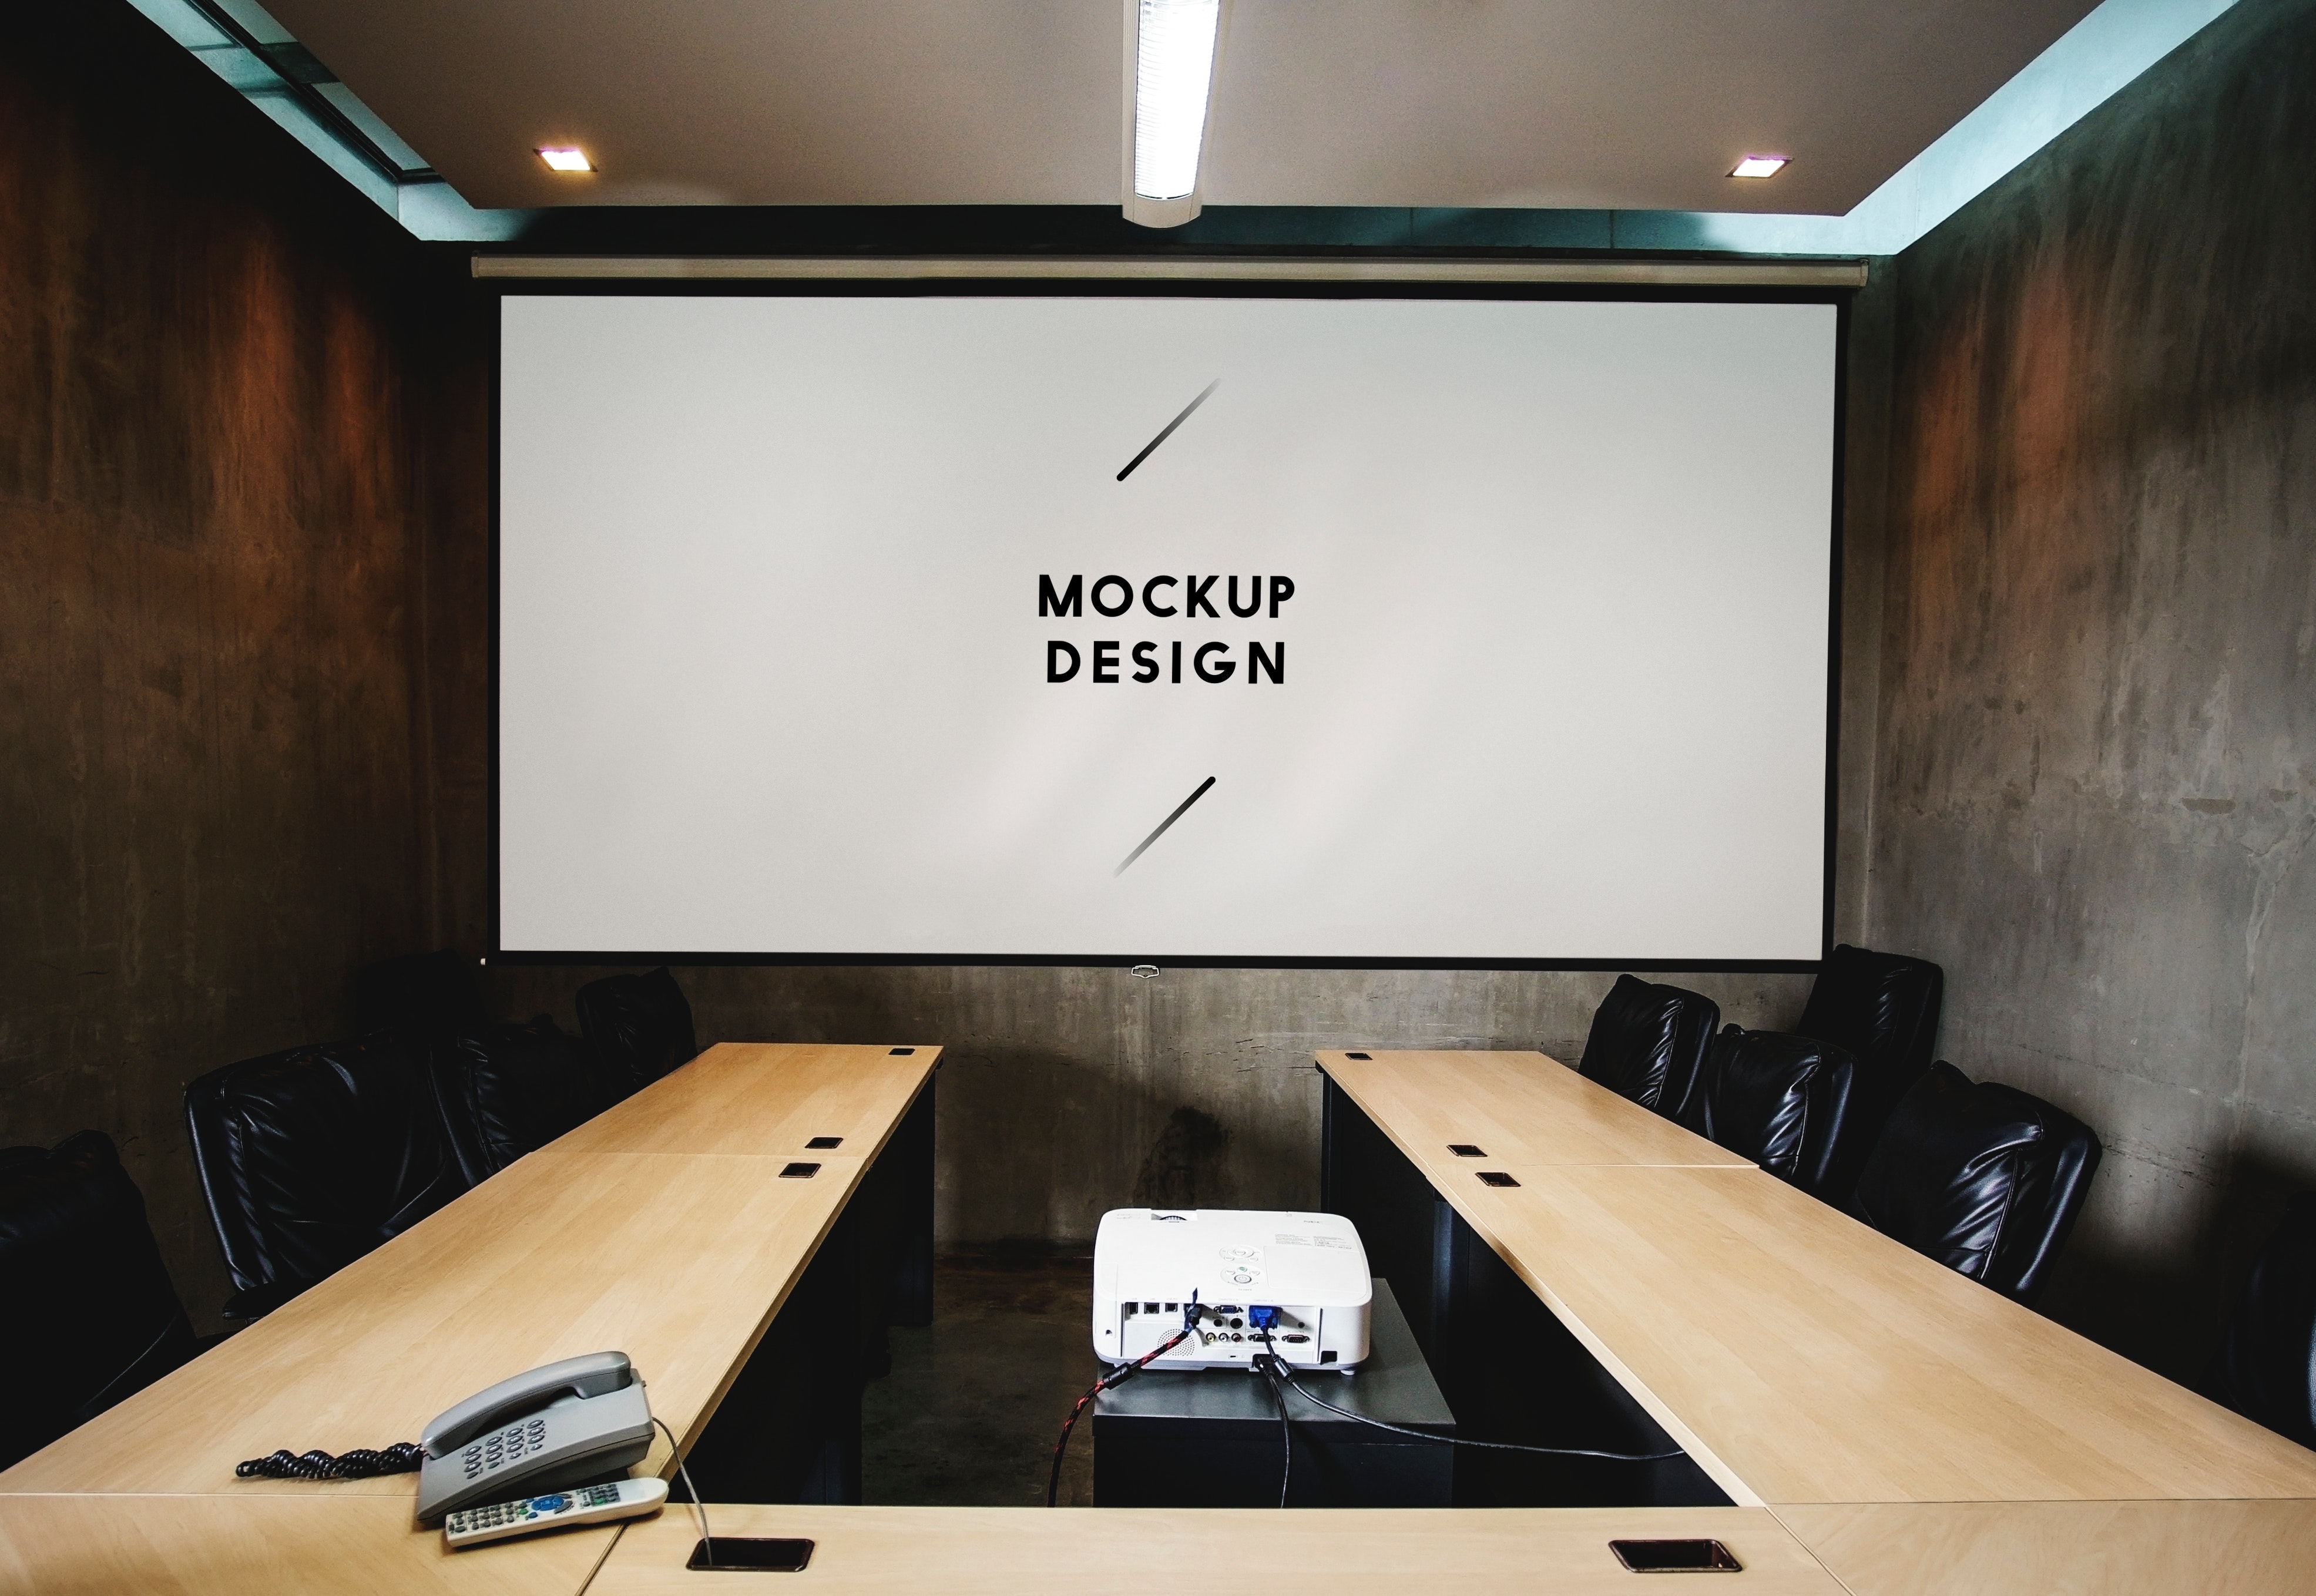 You are currently viewing Tips for designing a conference room that will “WOW” clients.